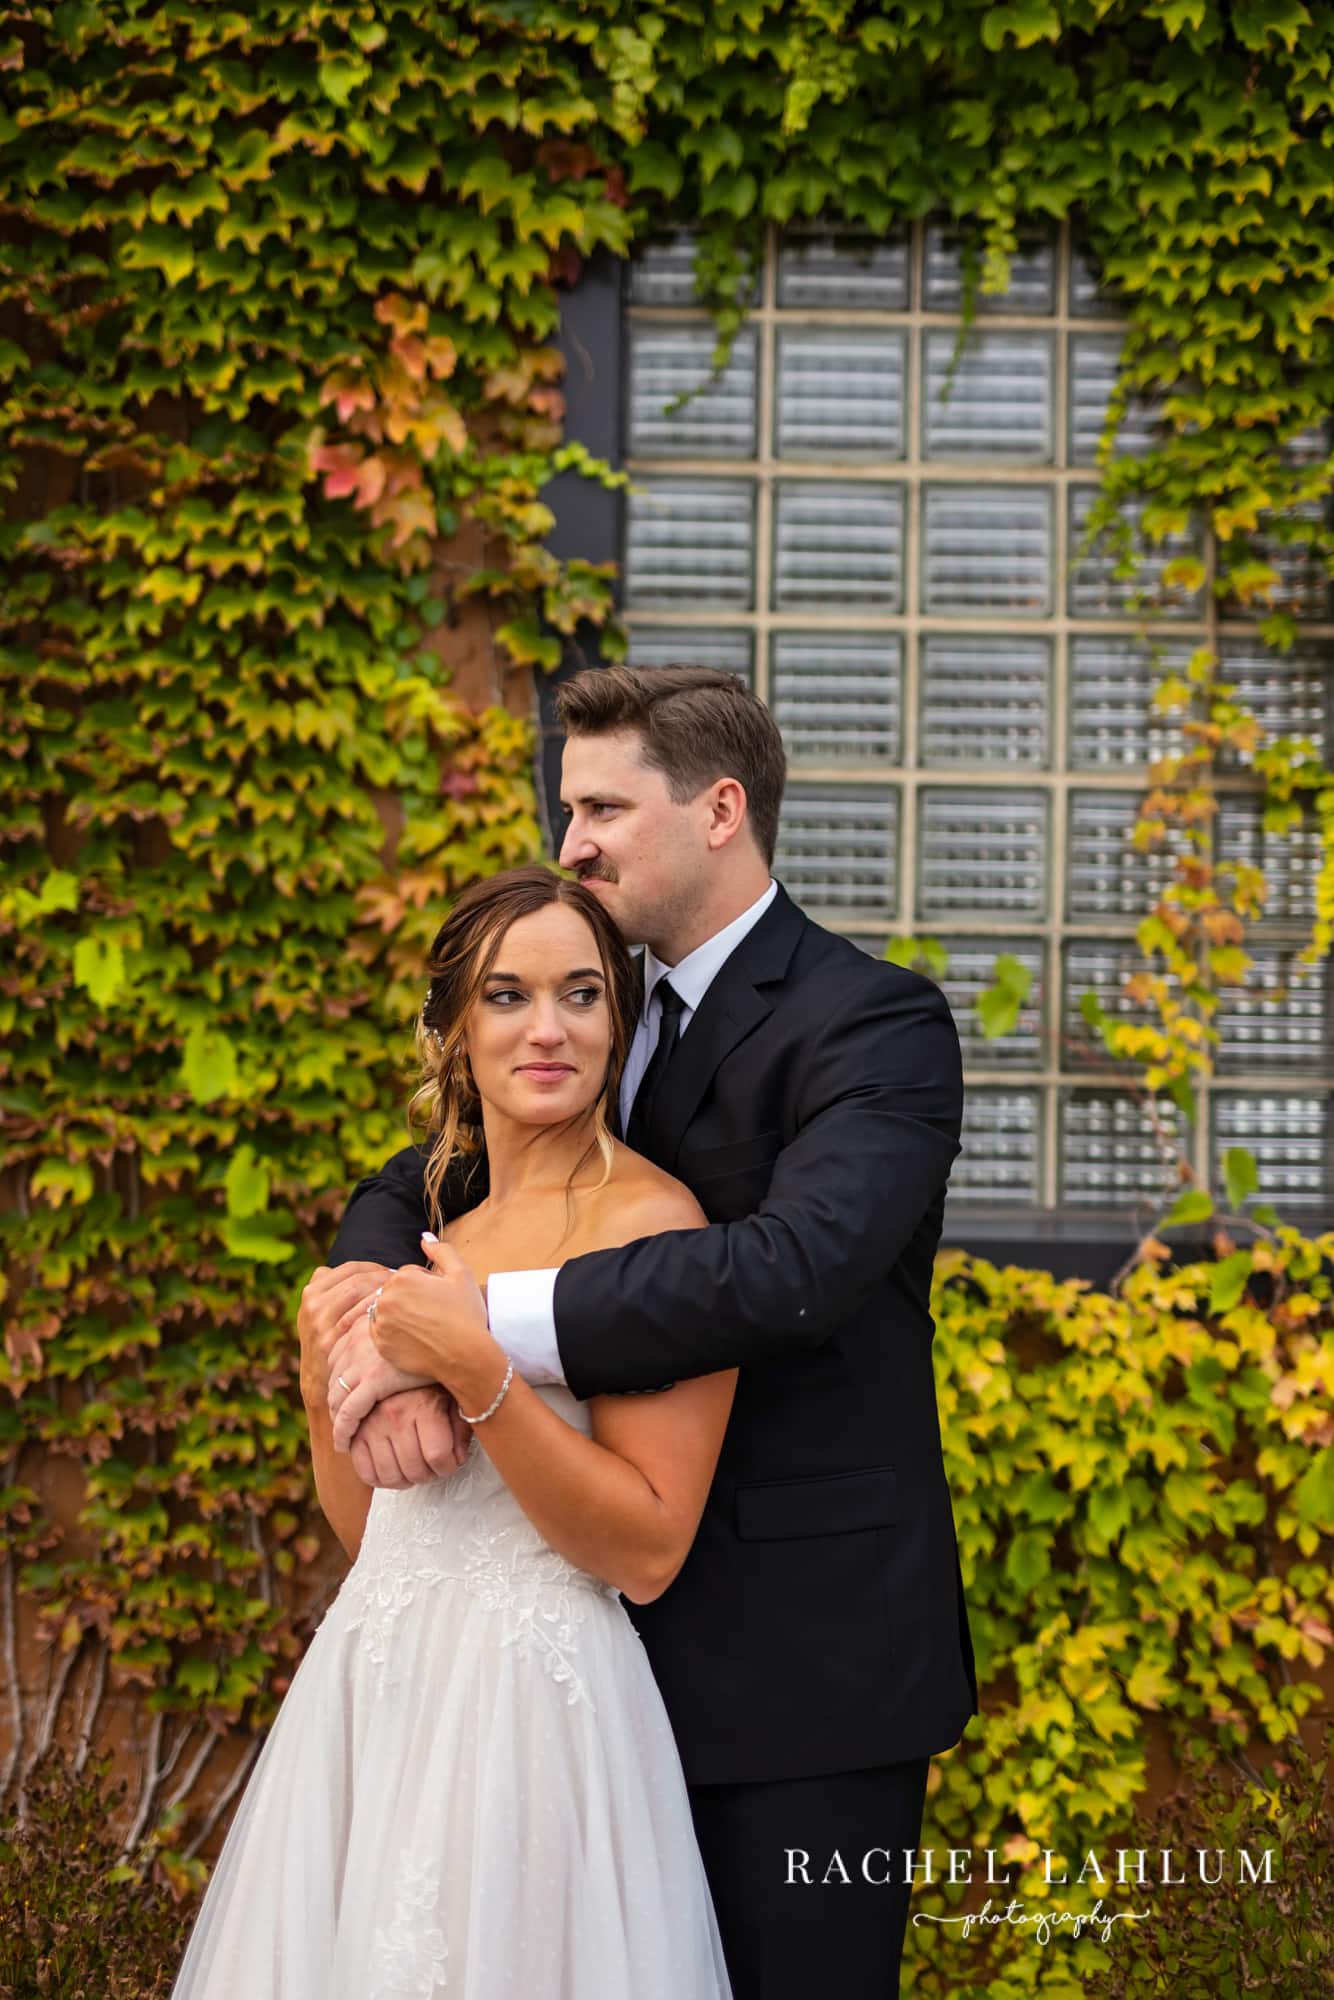 Bride and groom pose for wedding photography in front of an ivy wall at The Boathouse in Alexanrdia, Minnesota.